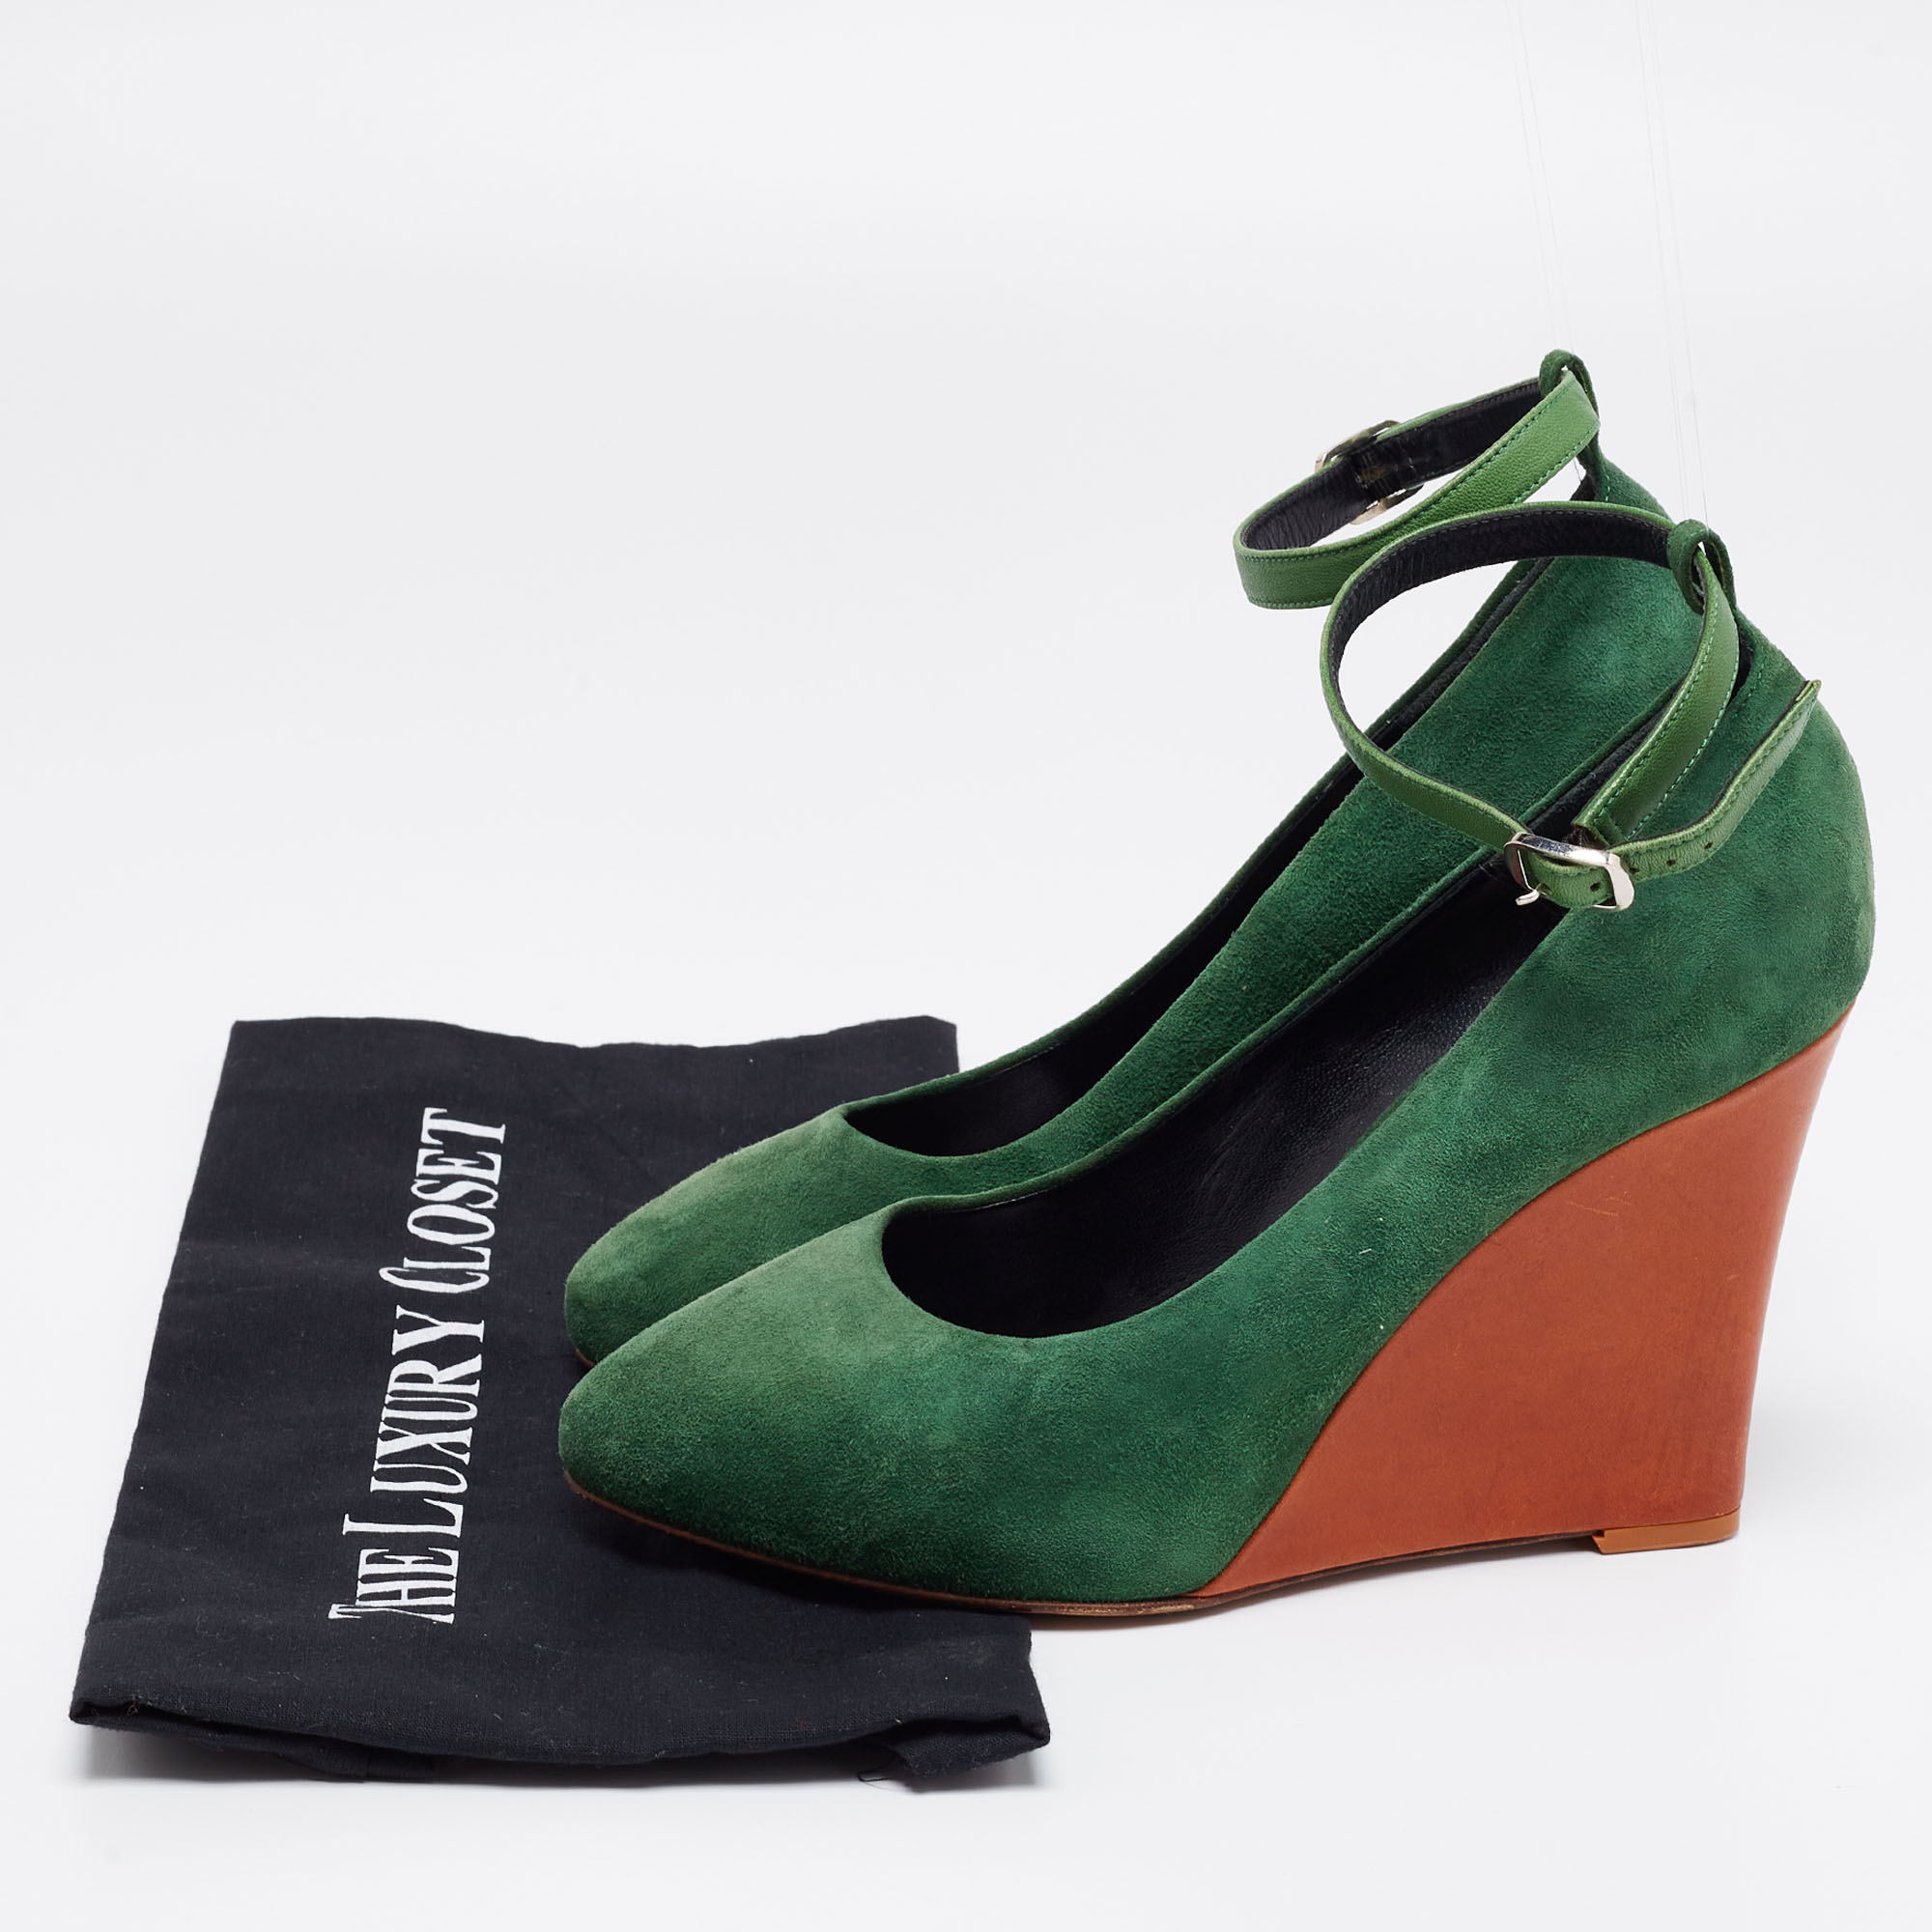 Celine Green Suede Wedge Ankle Strap Pumps Size 39